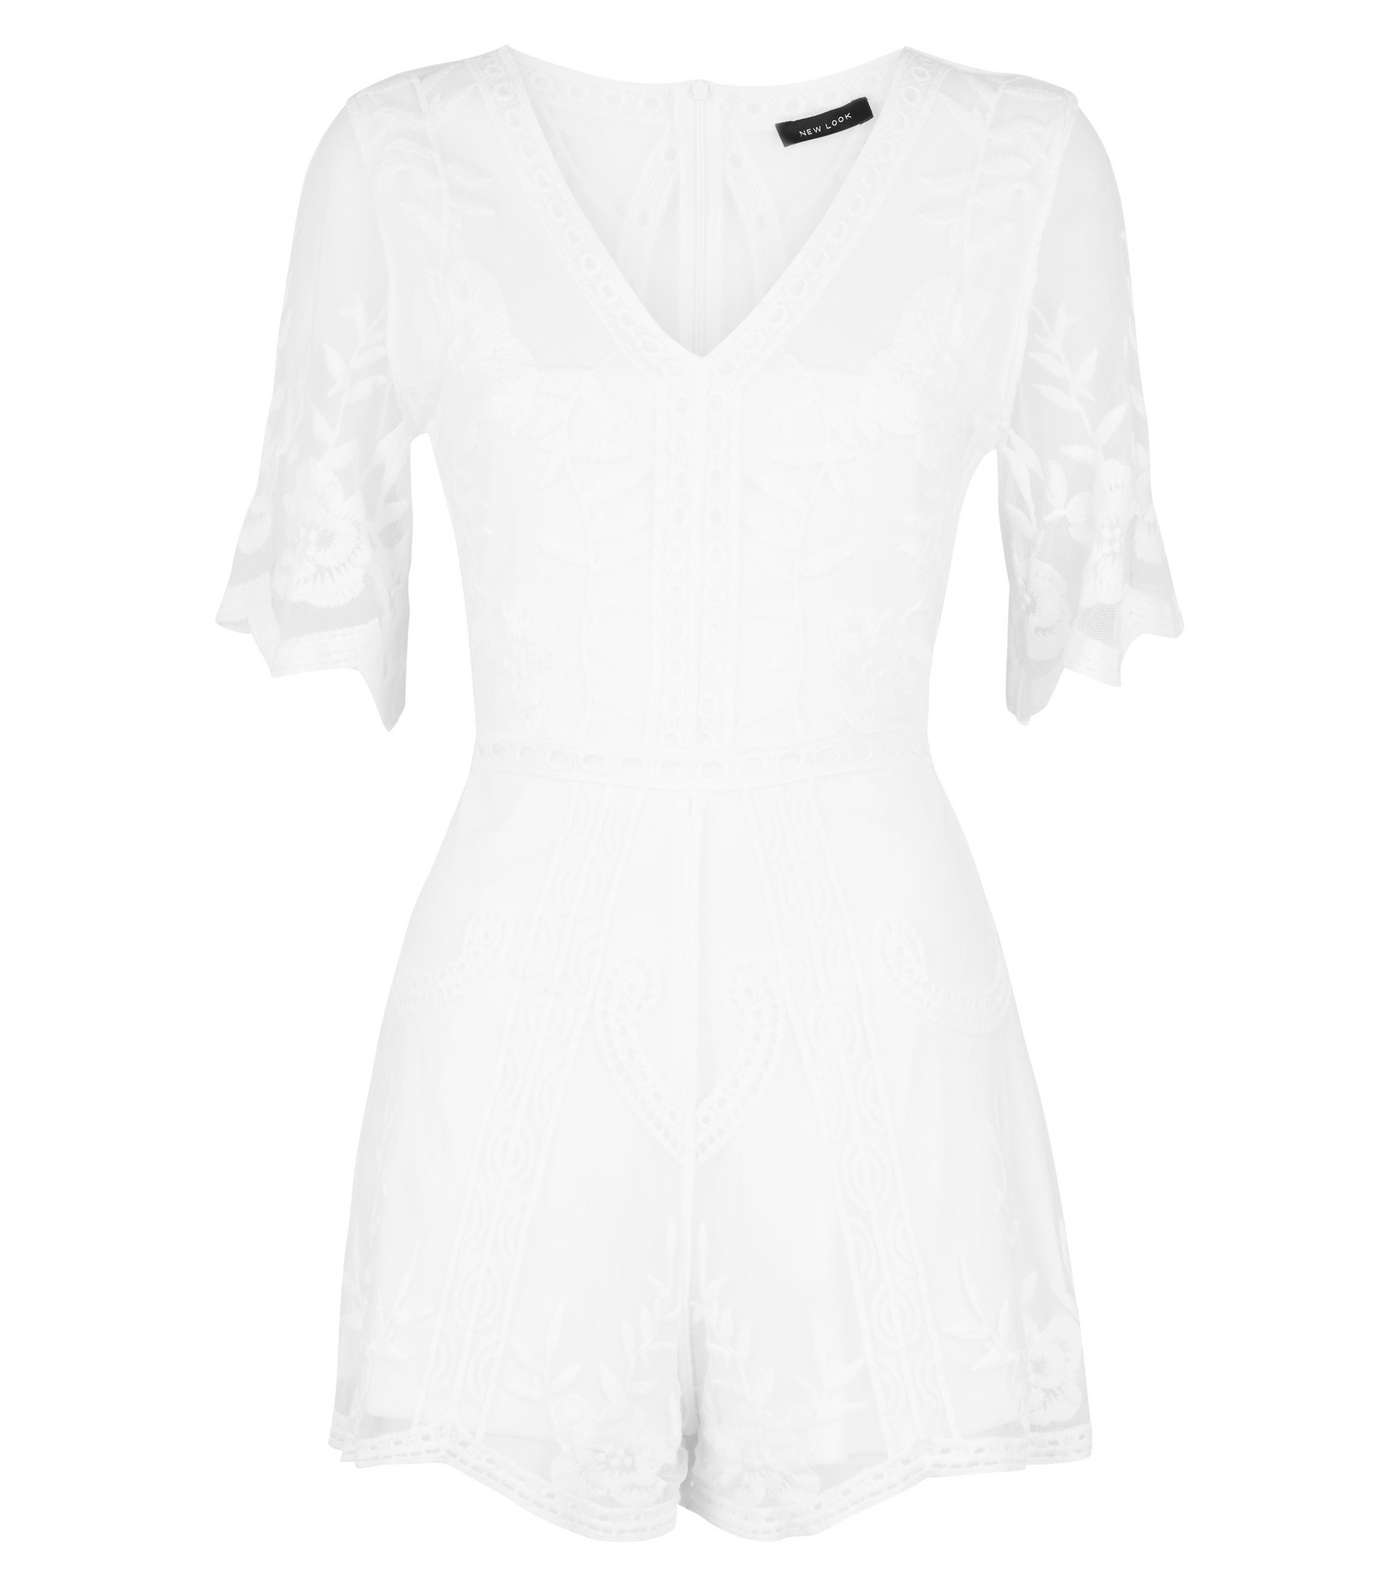 Cream Crochet Embroidered Mesh Playsuit Image 4